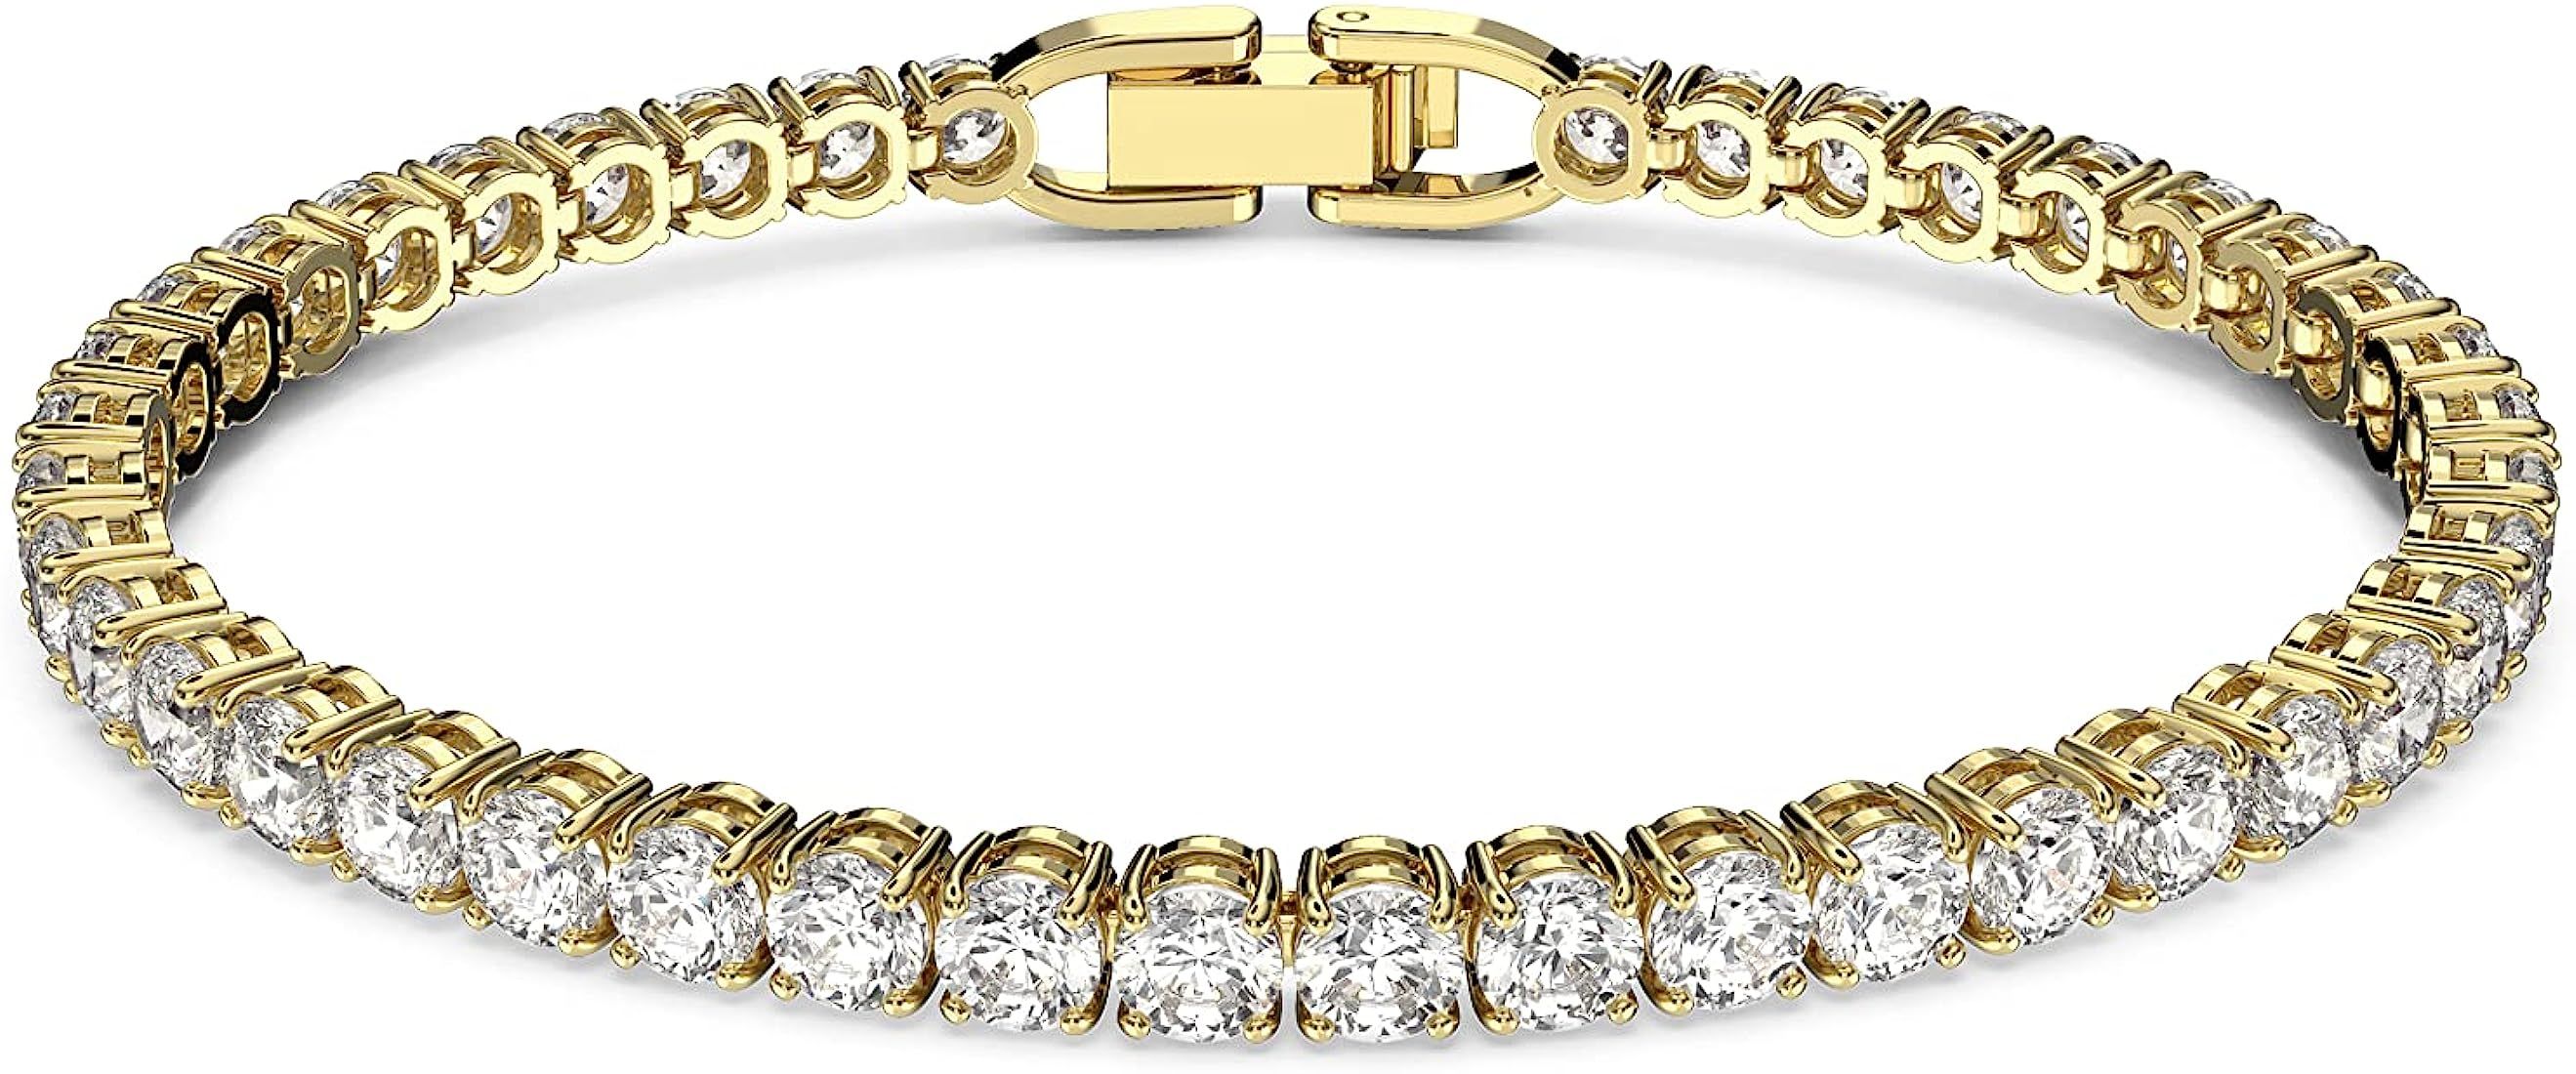 SWAROVSKI Tennis Deluxe Crystal Bracelet and Necklace Jewelry Collection | Amazon (US)